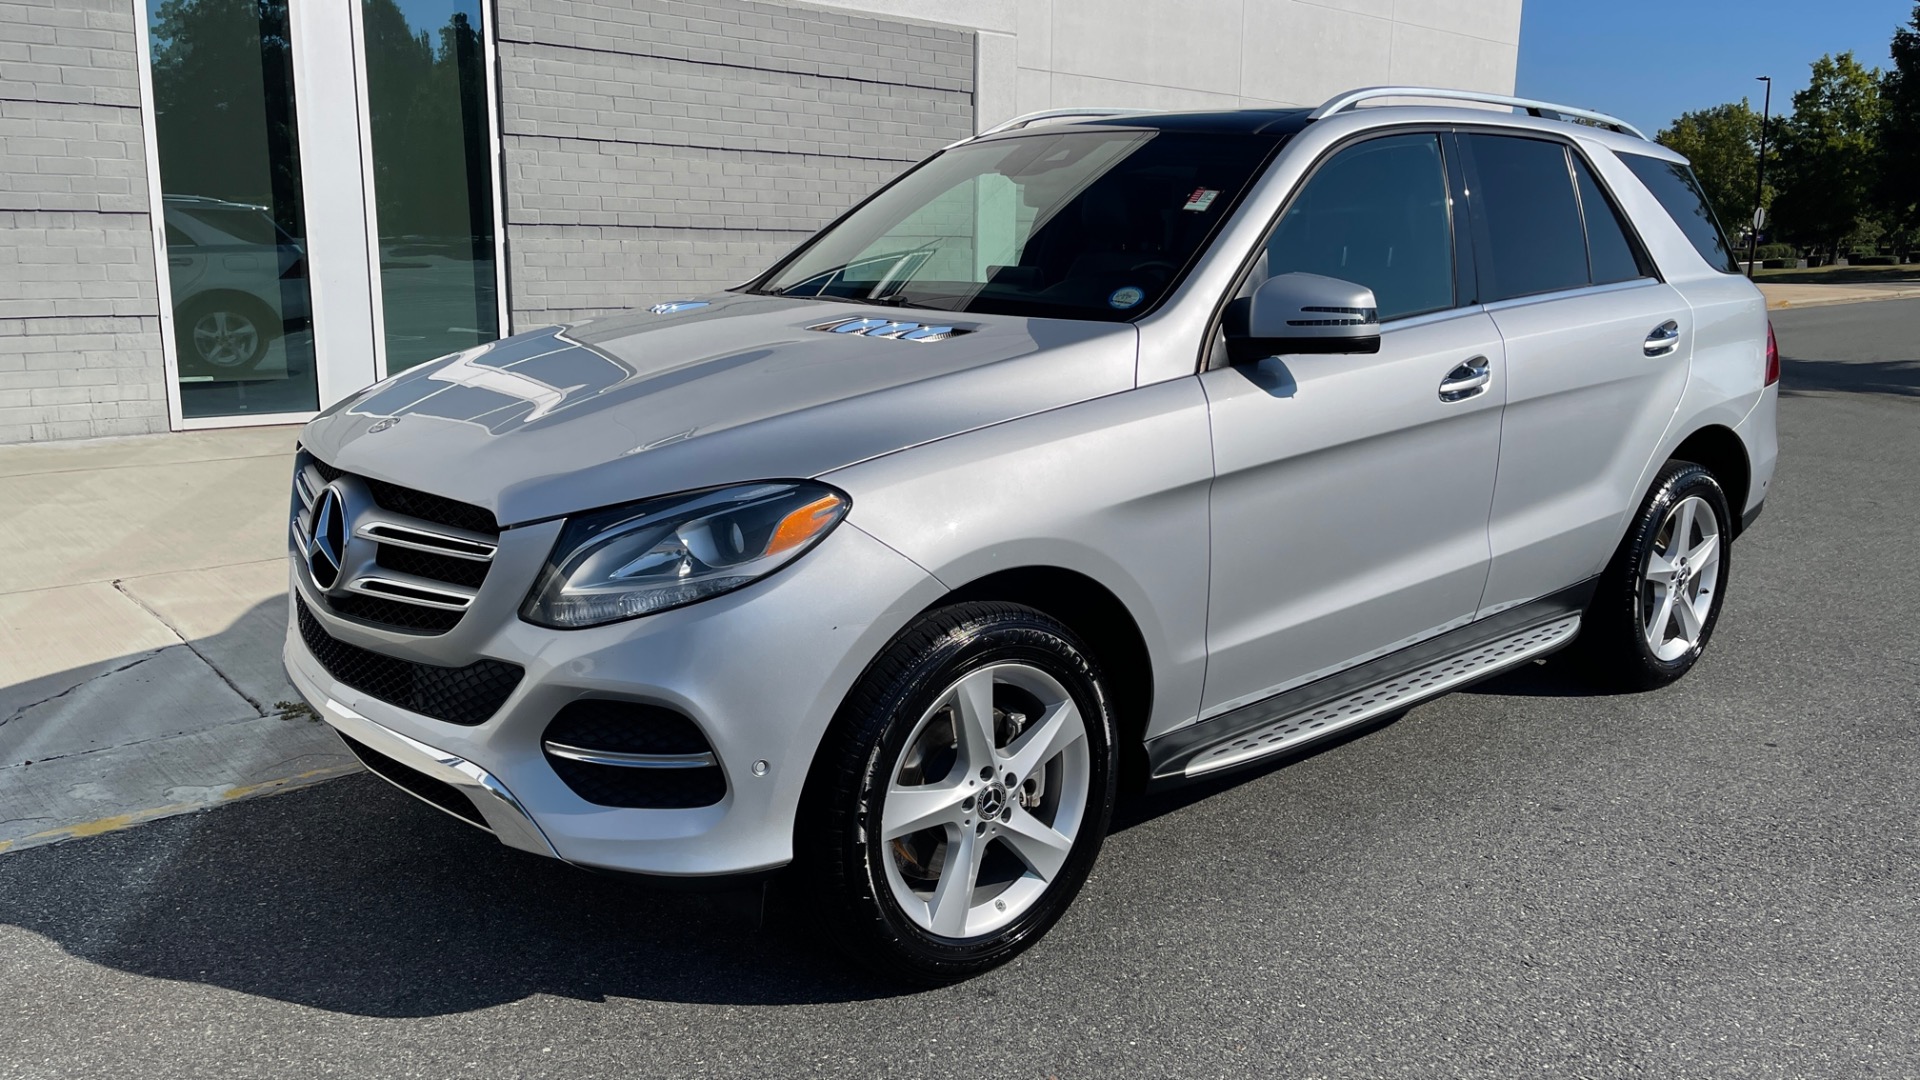 Used 2018 Mercedes-Benz GLE GLE 350 / PREMIUM / PANORAMIC SUNROOF / PREMIUM SOUND / 4MATIC for sale $34,999 at Formula Imports in Charlotte NC 28227 4